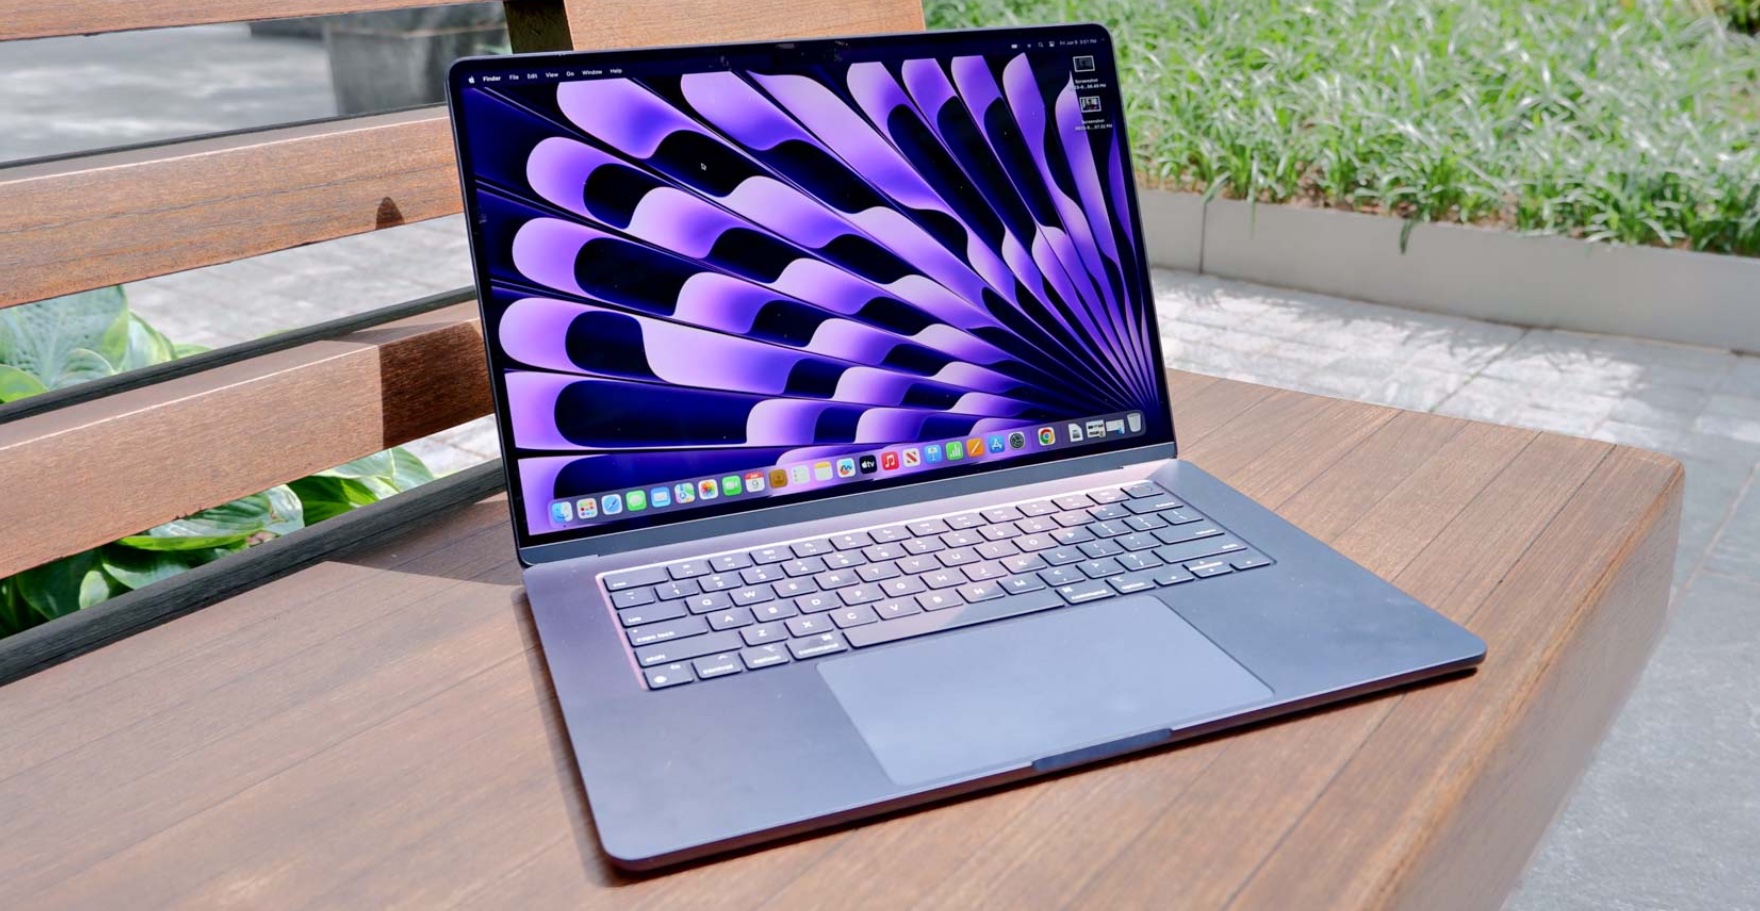 Apple MacBook Air 15-inch review: The best 15-inch…